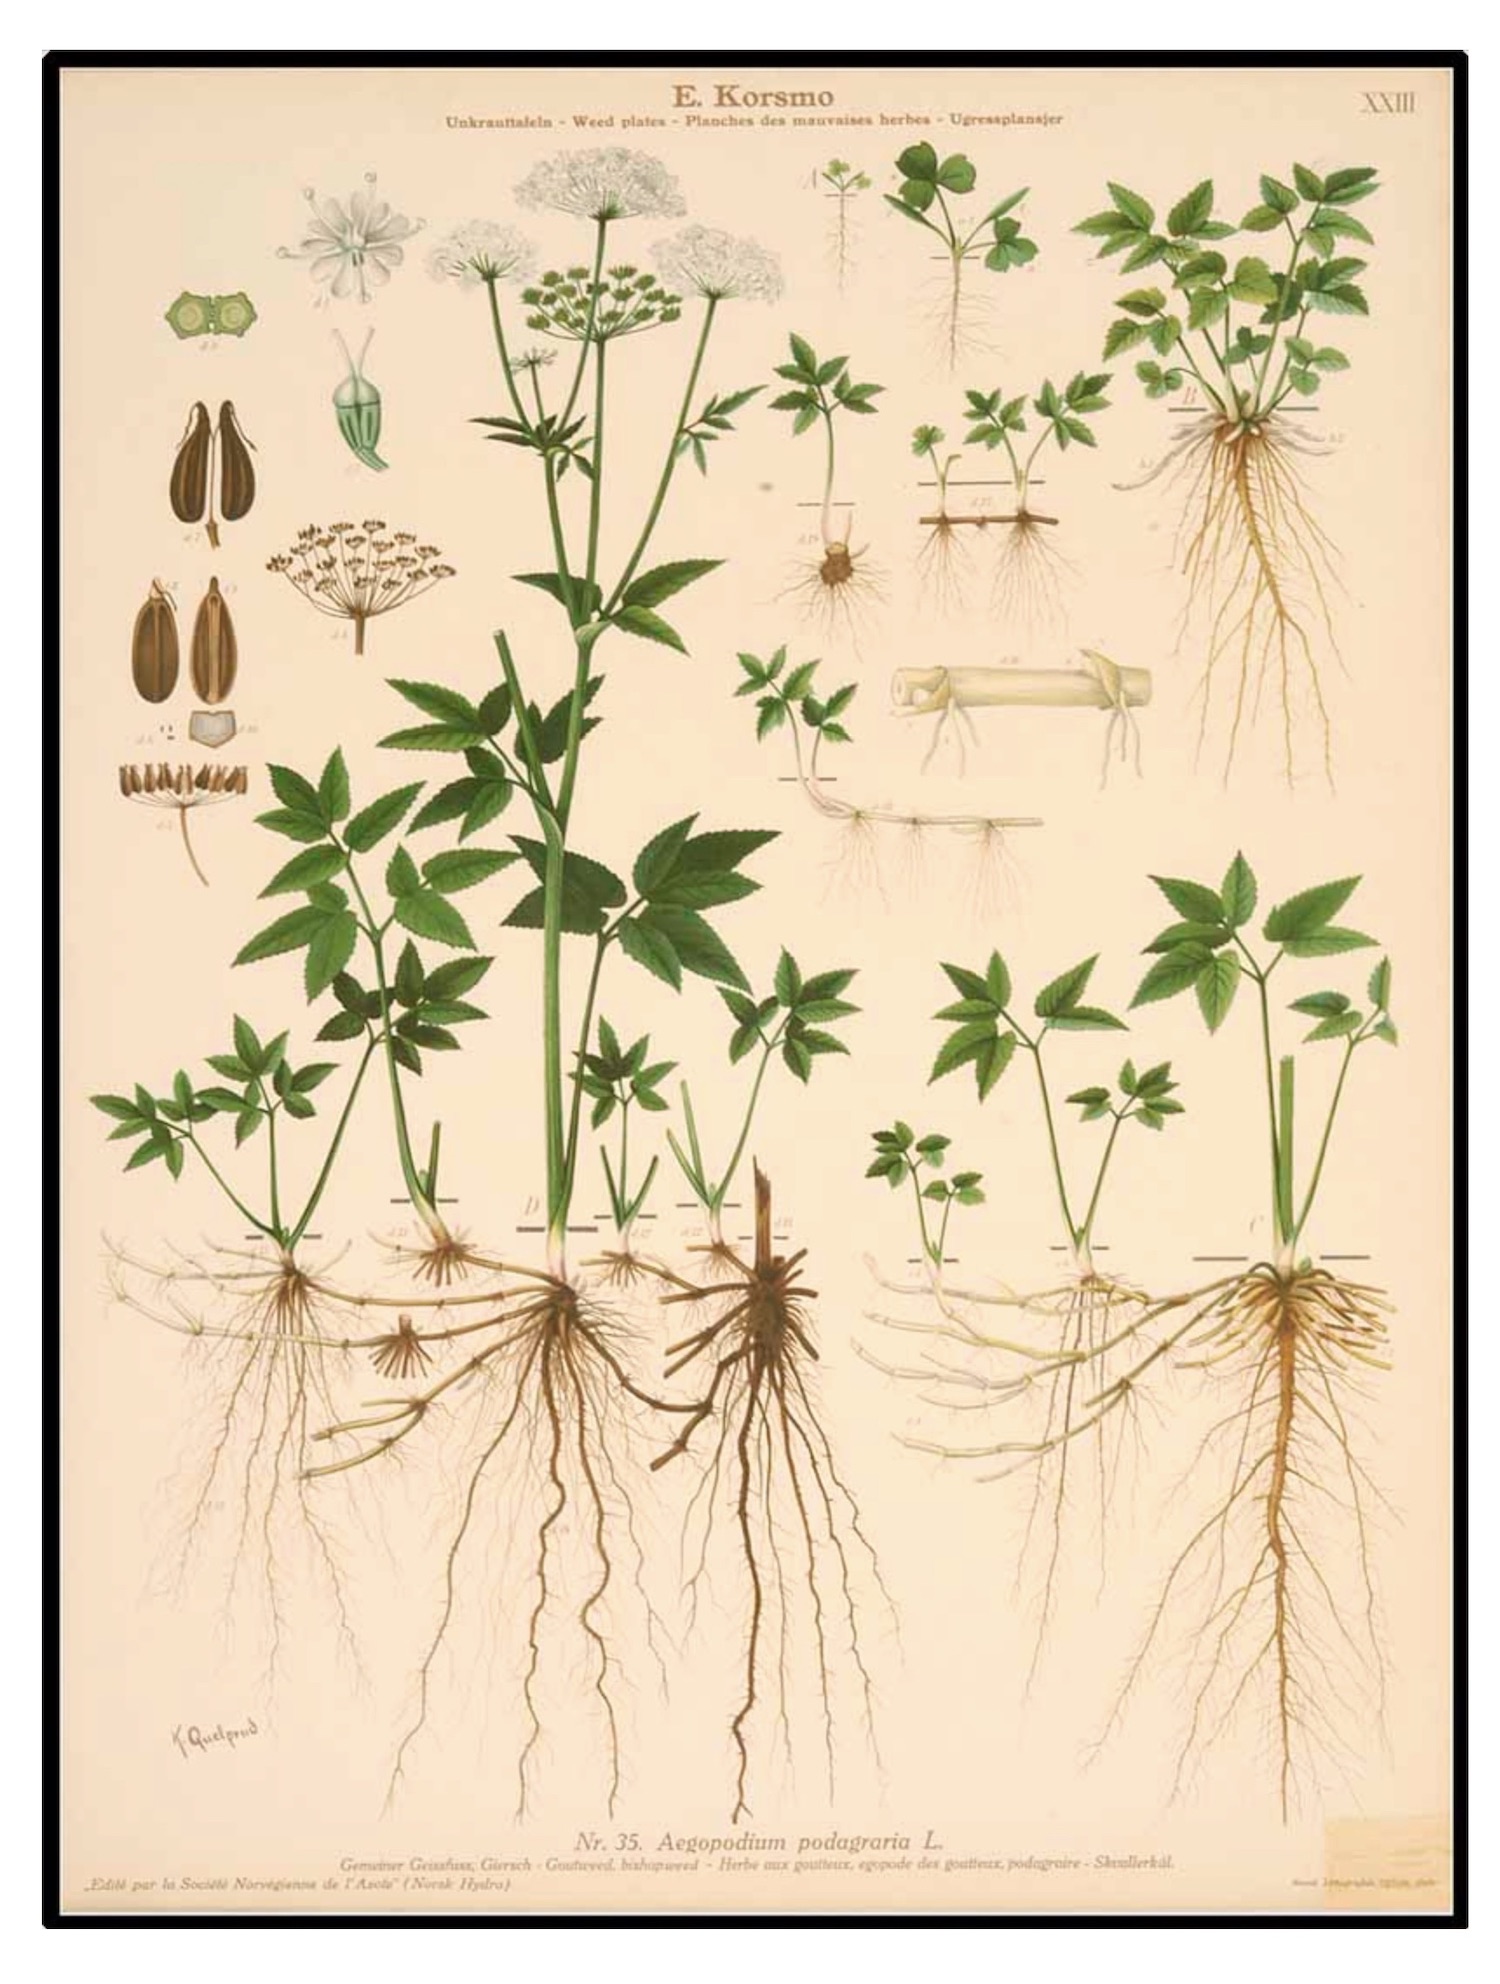 Goutweed illustration published in weed book circa 1934.